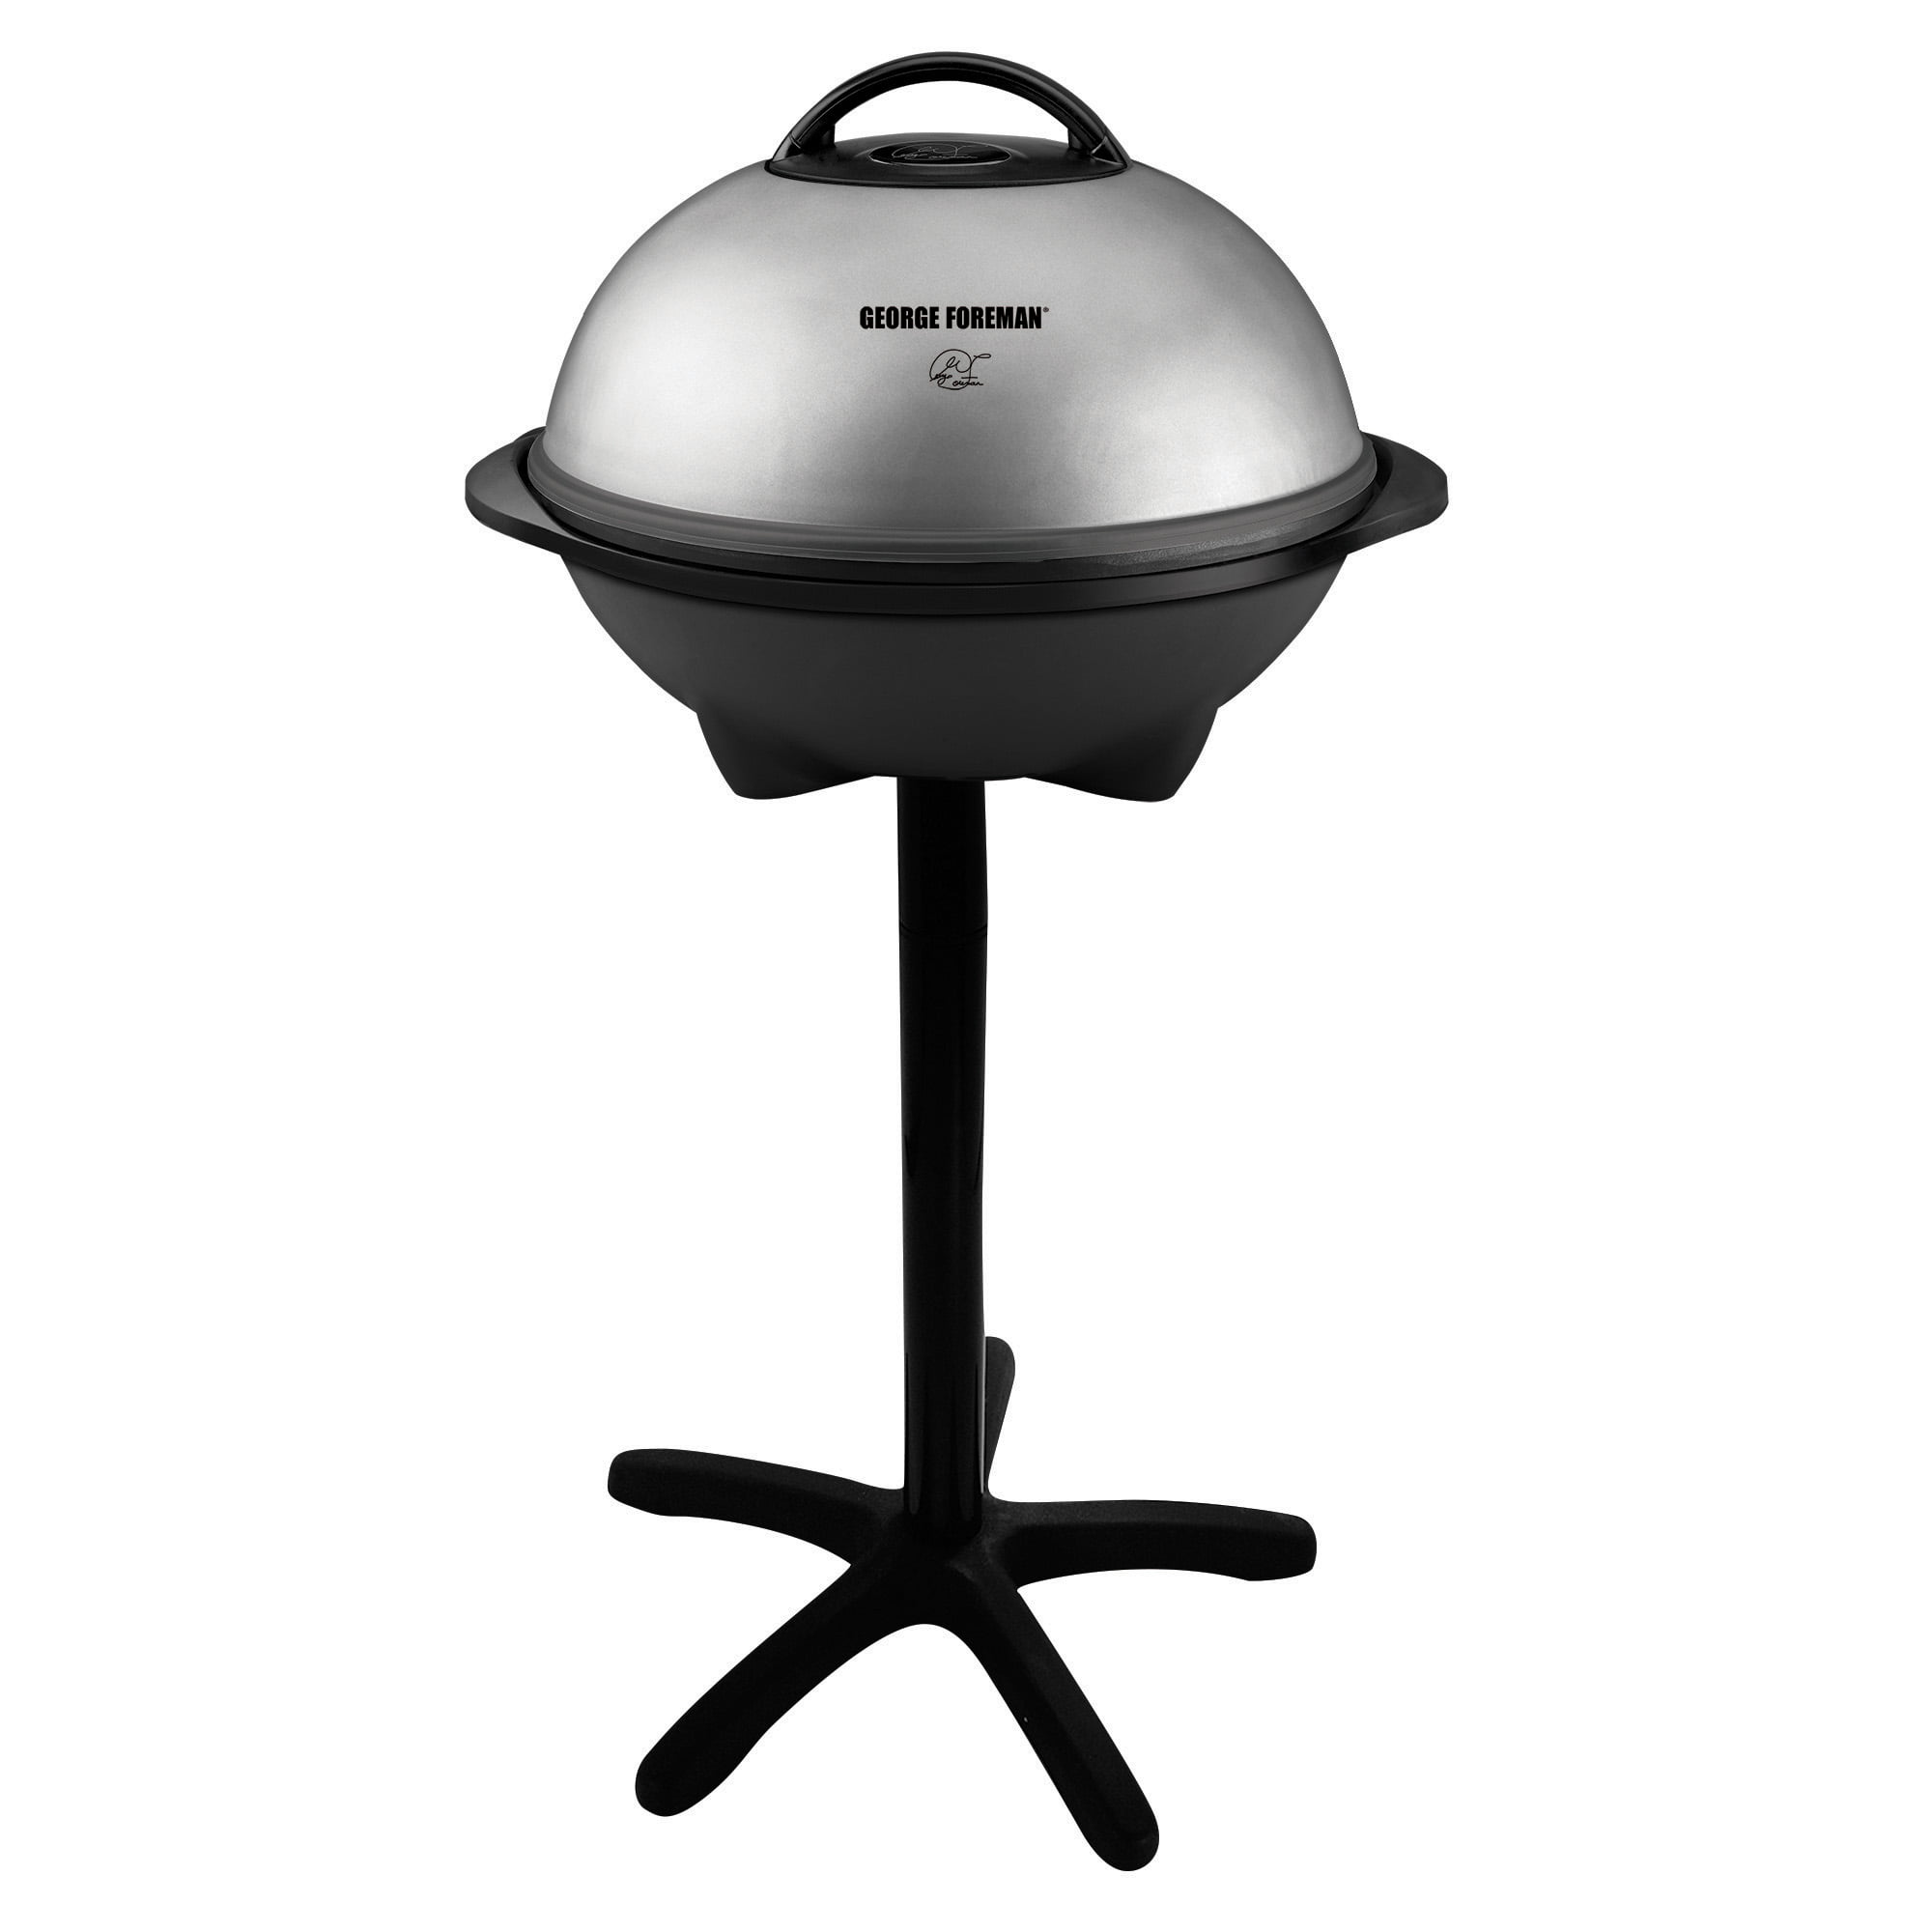 What colors do George Foreman indoor grills come in?